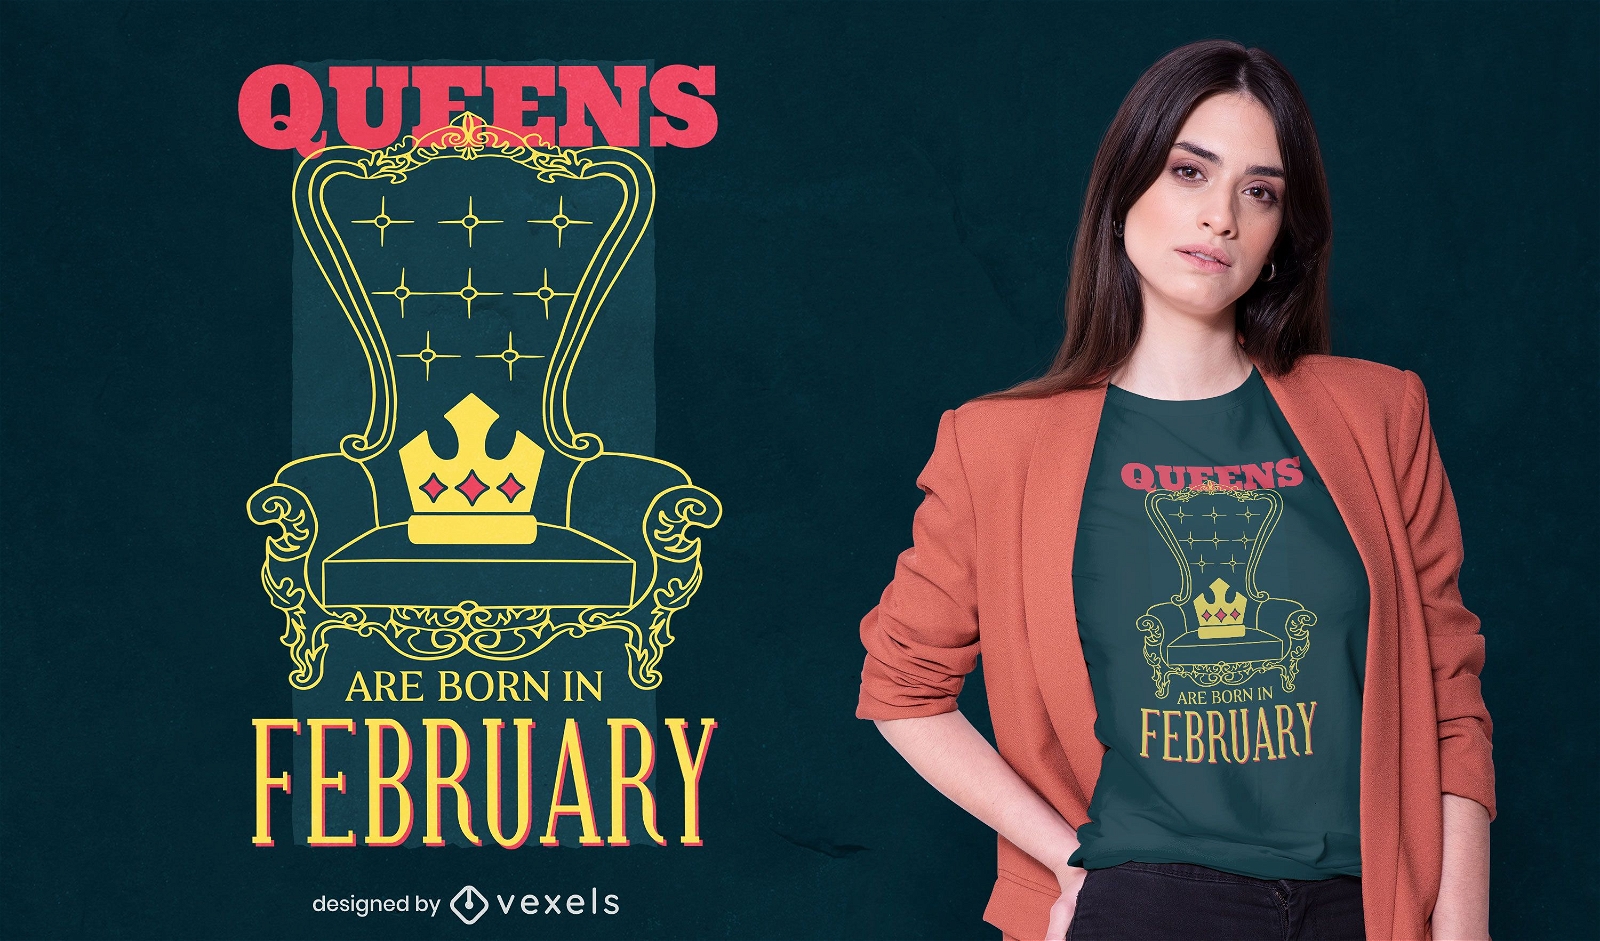 Queens are born in febraury t-shirt design